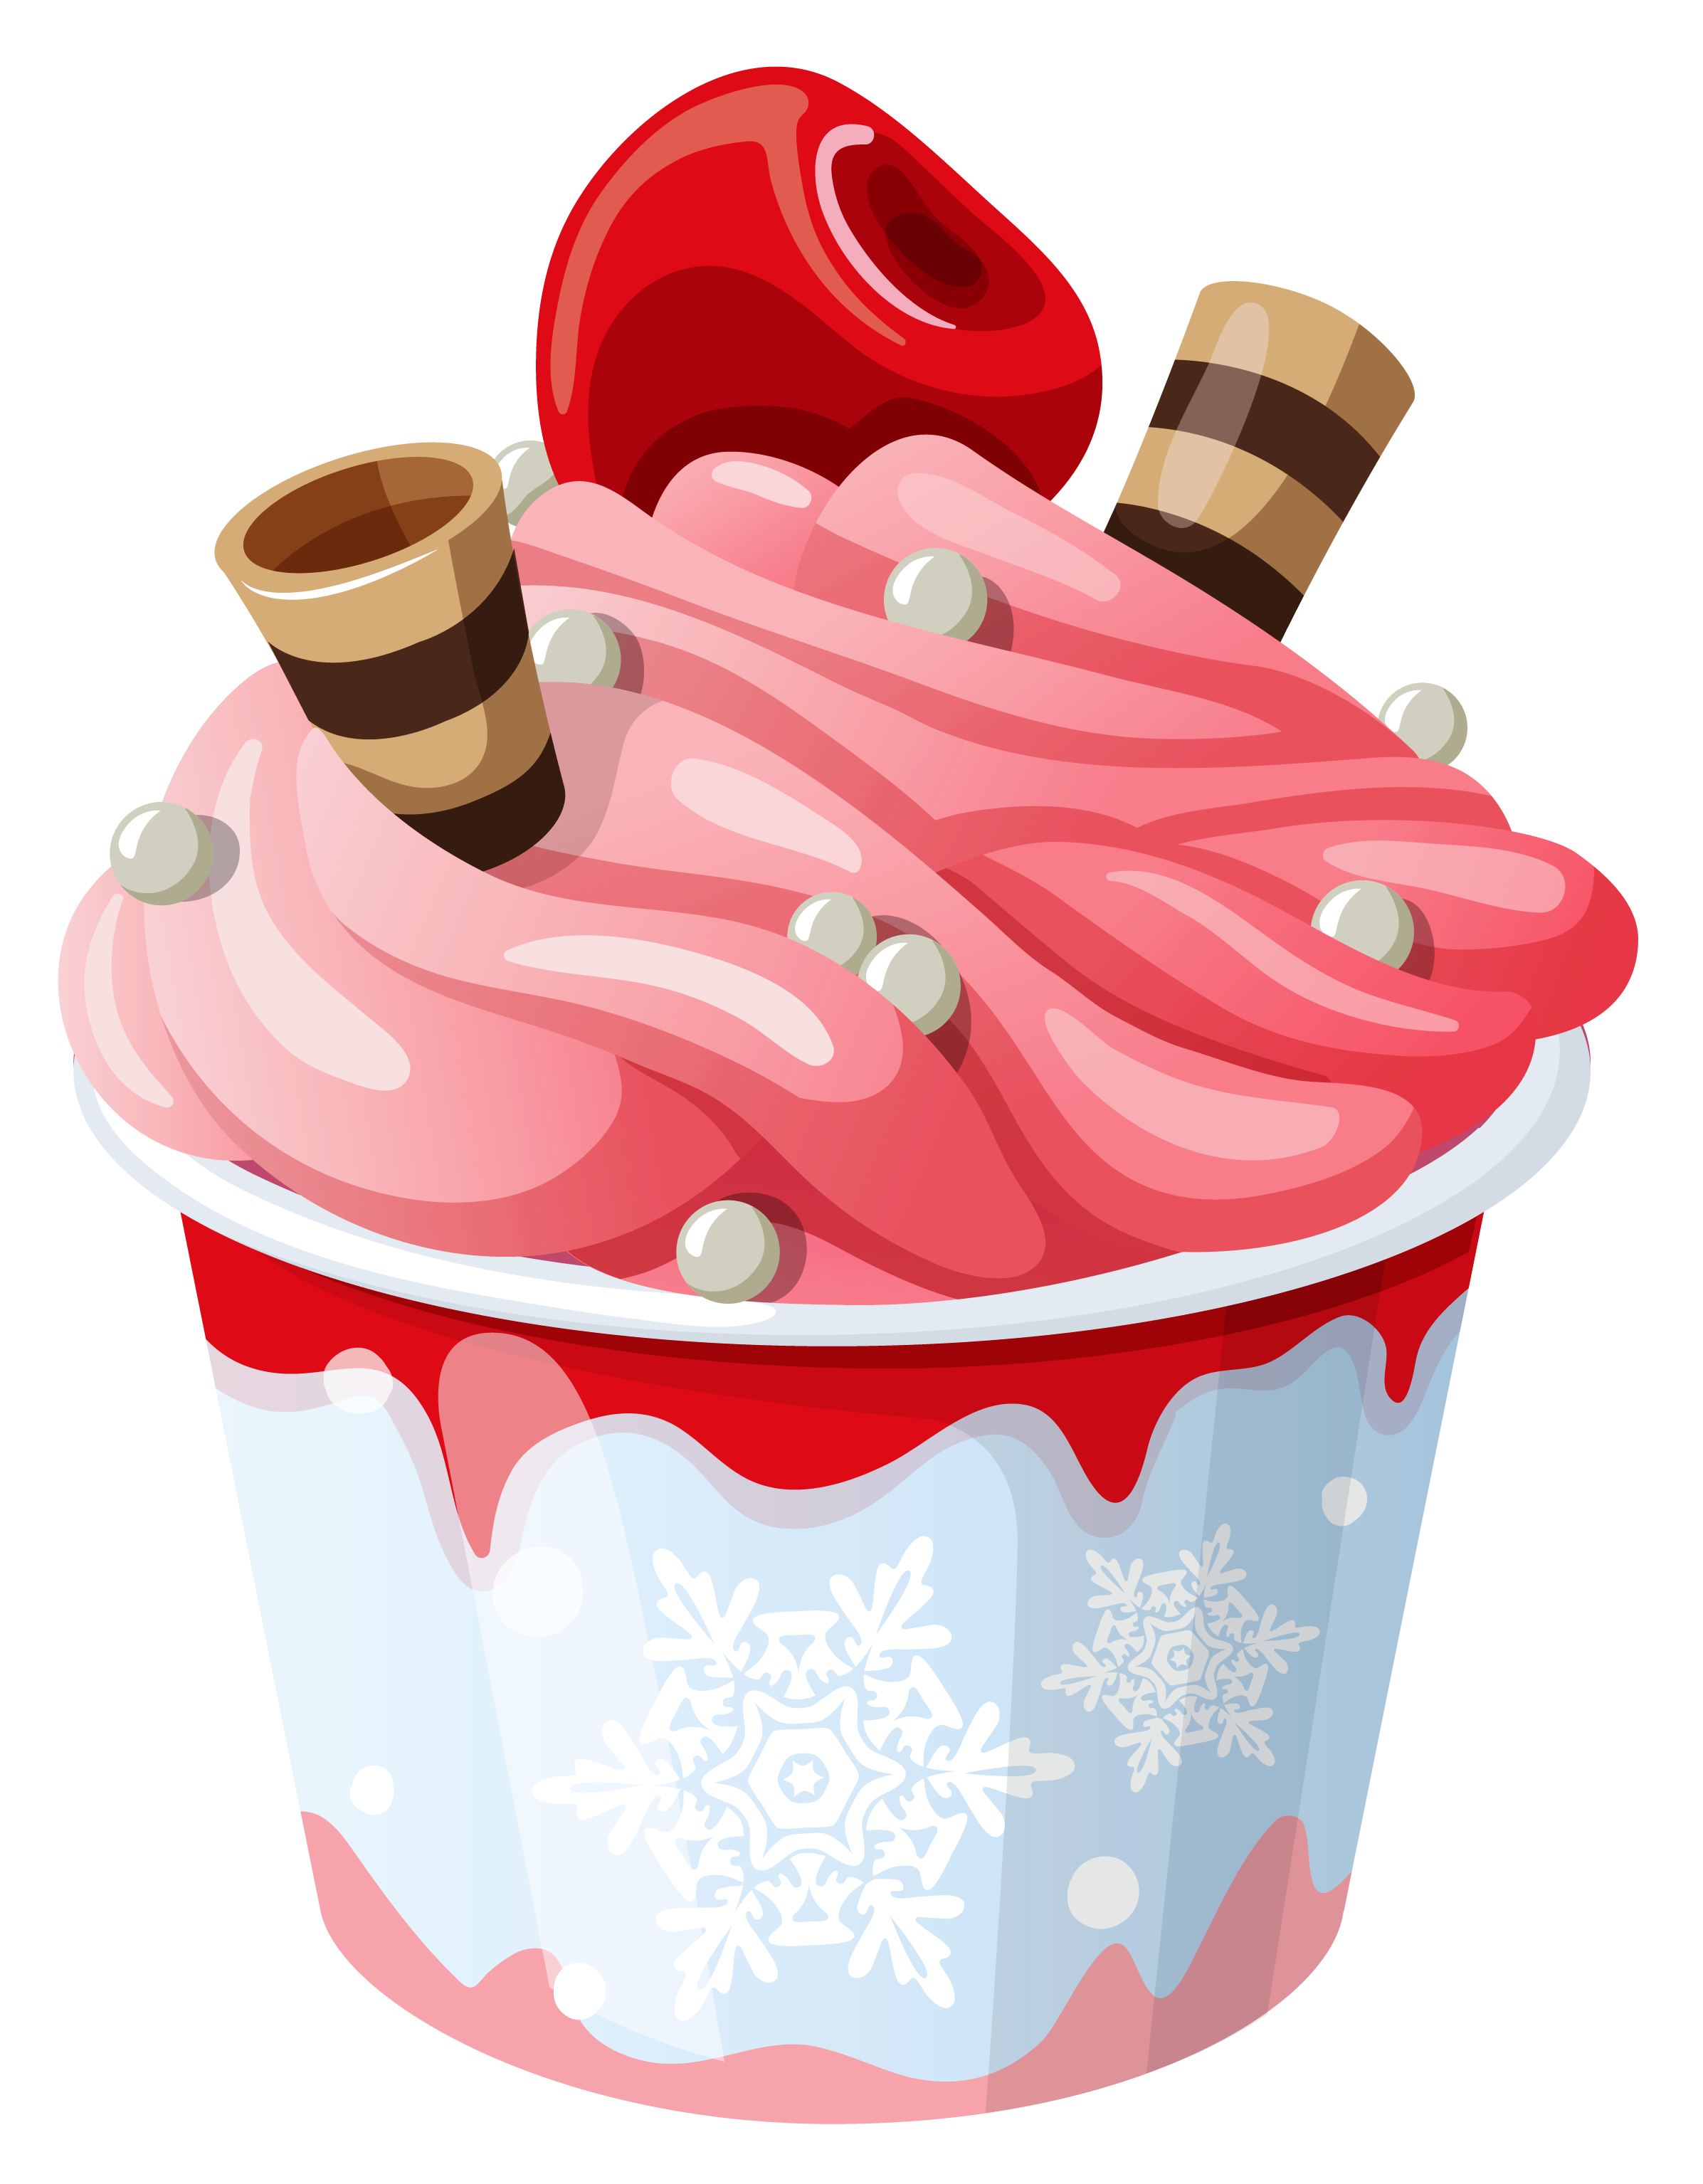 Doughnut clipart christmas in dixie. Ice cream cup png